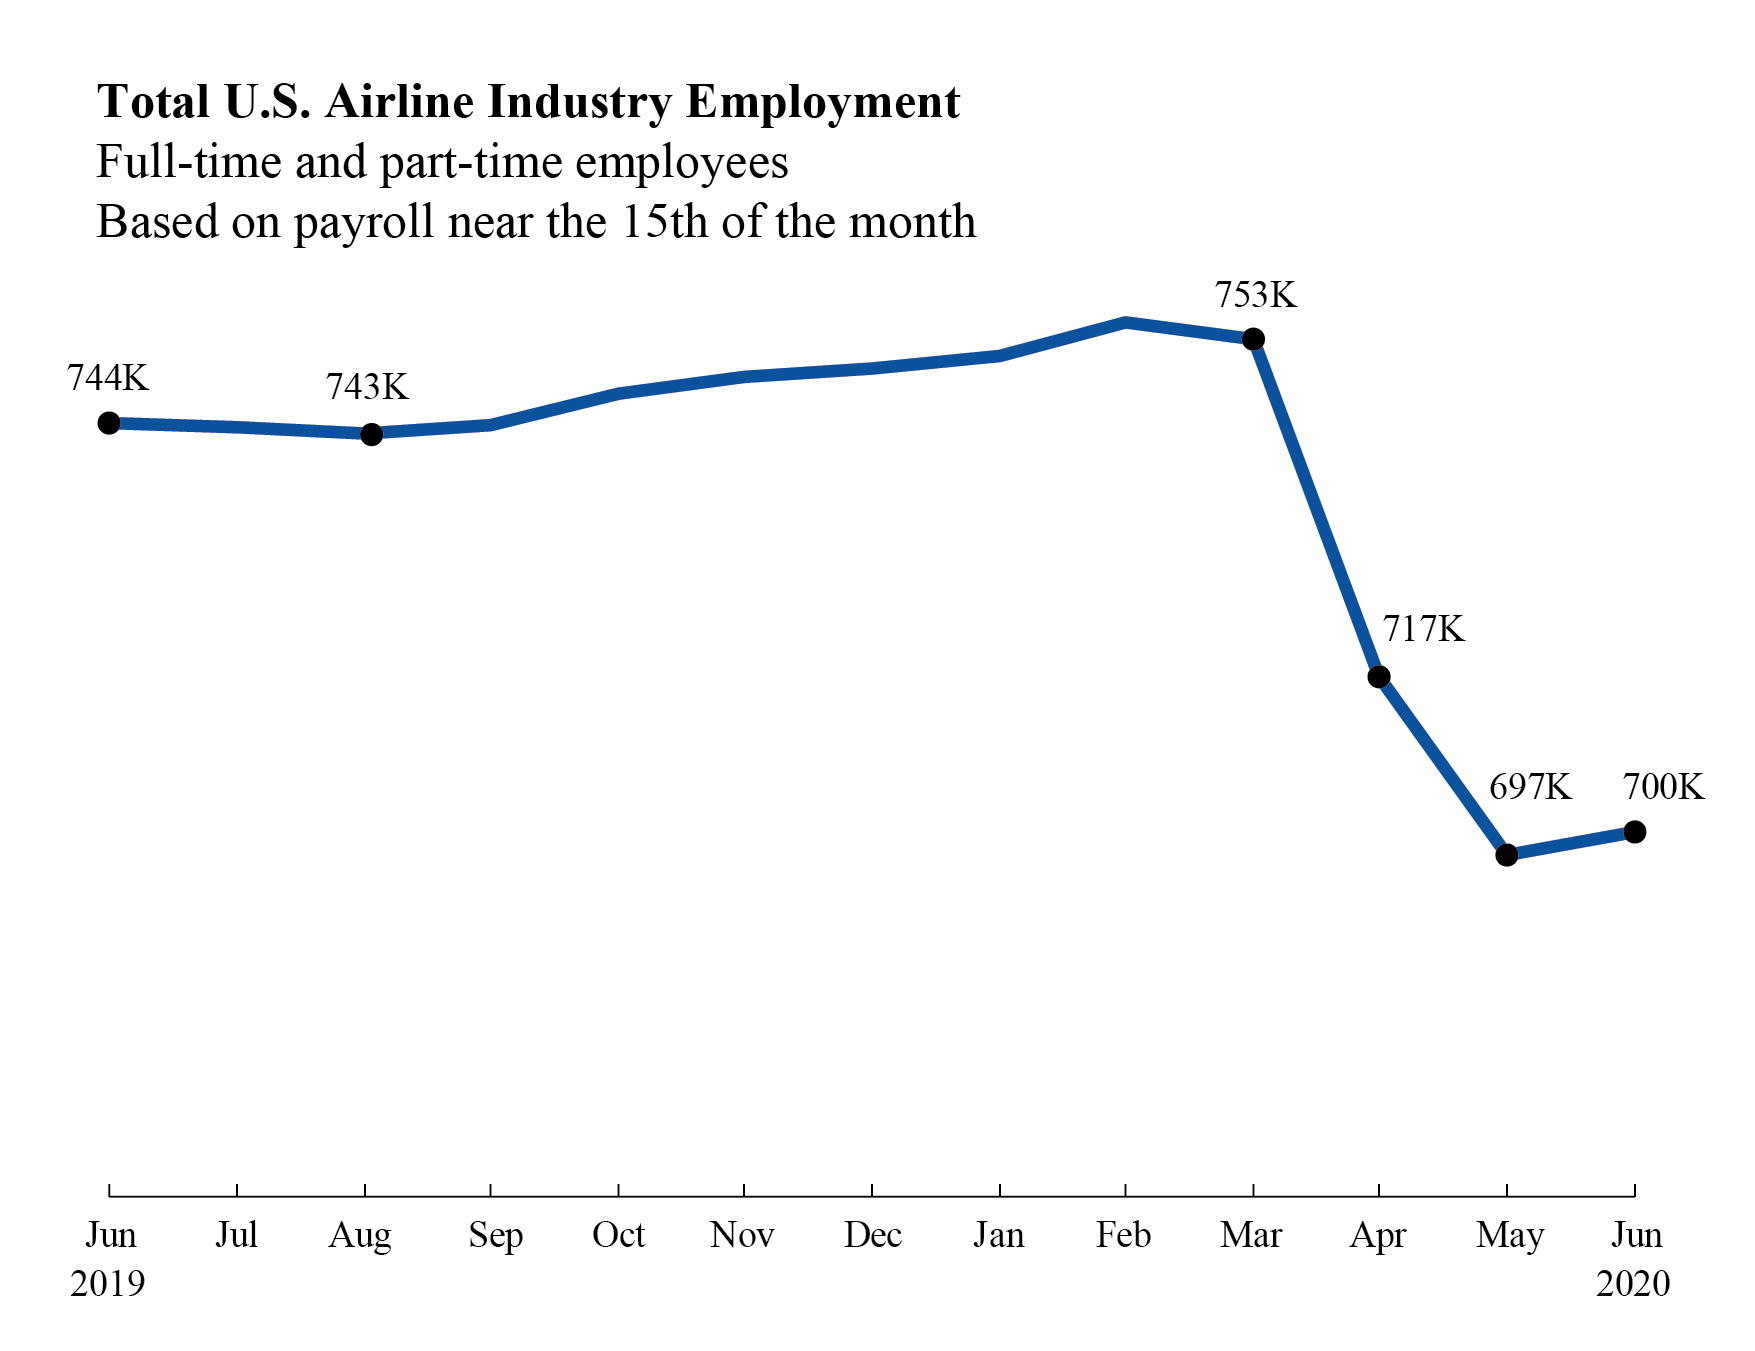 Airline Full-Time/Part-Time Employment, June 2020